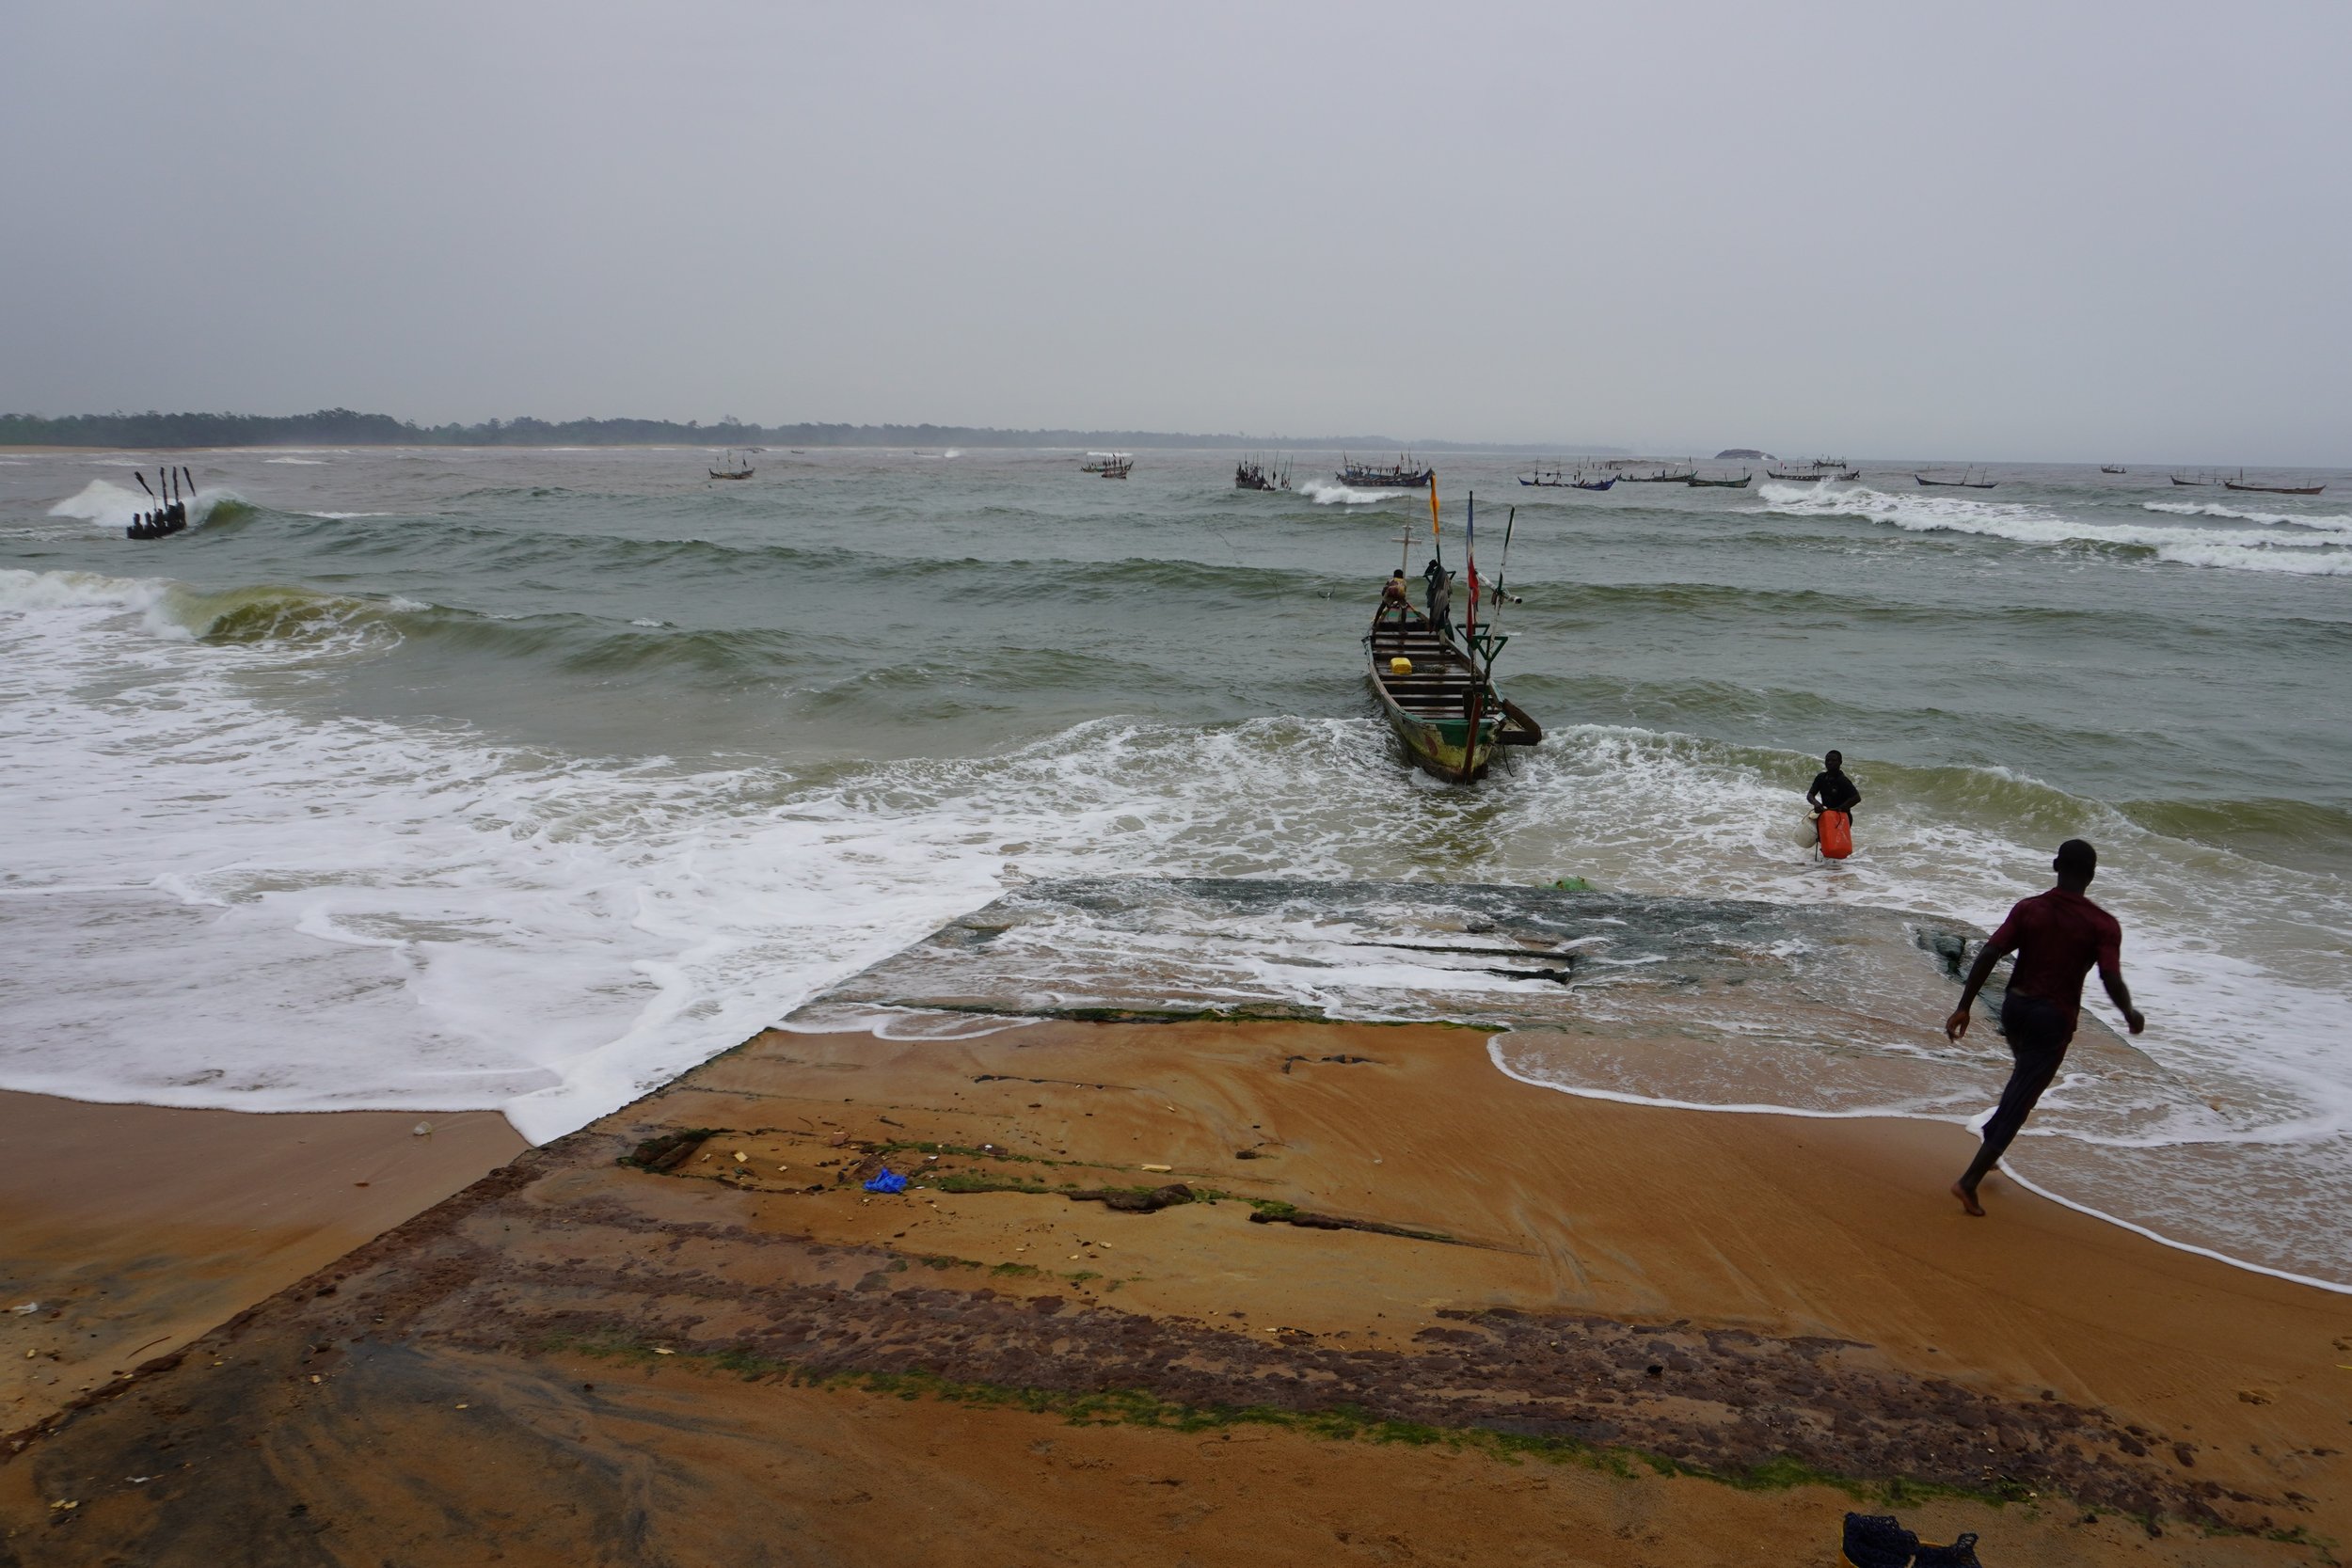  Even though there are several hundred pirogues registered in Grand-Béréby, fishermen relocate according to the season to find fish. The majority of them land their catches at the port of San Pedro, where the big clients from Abidjan are found.   Cli